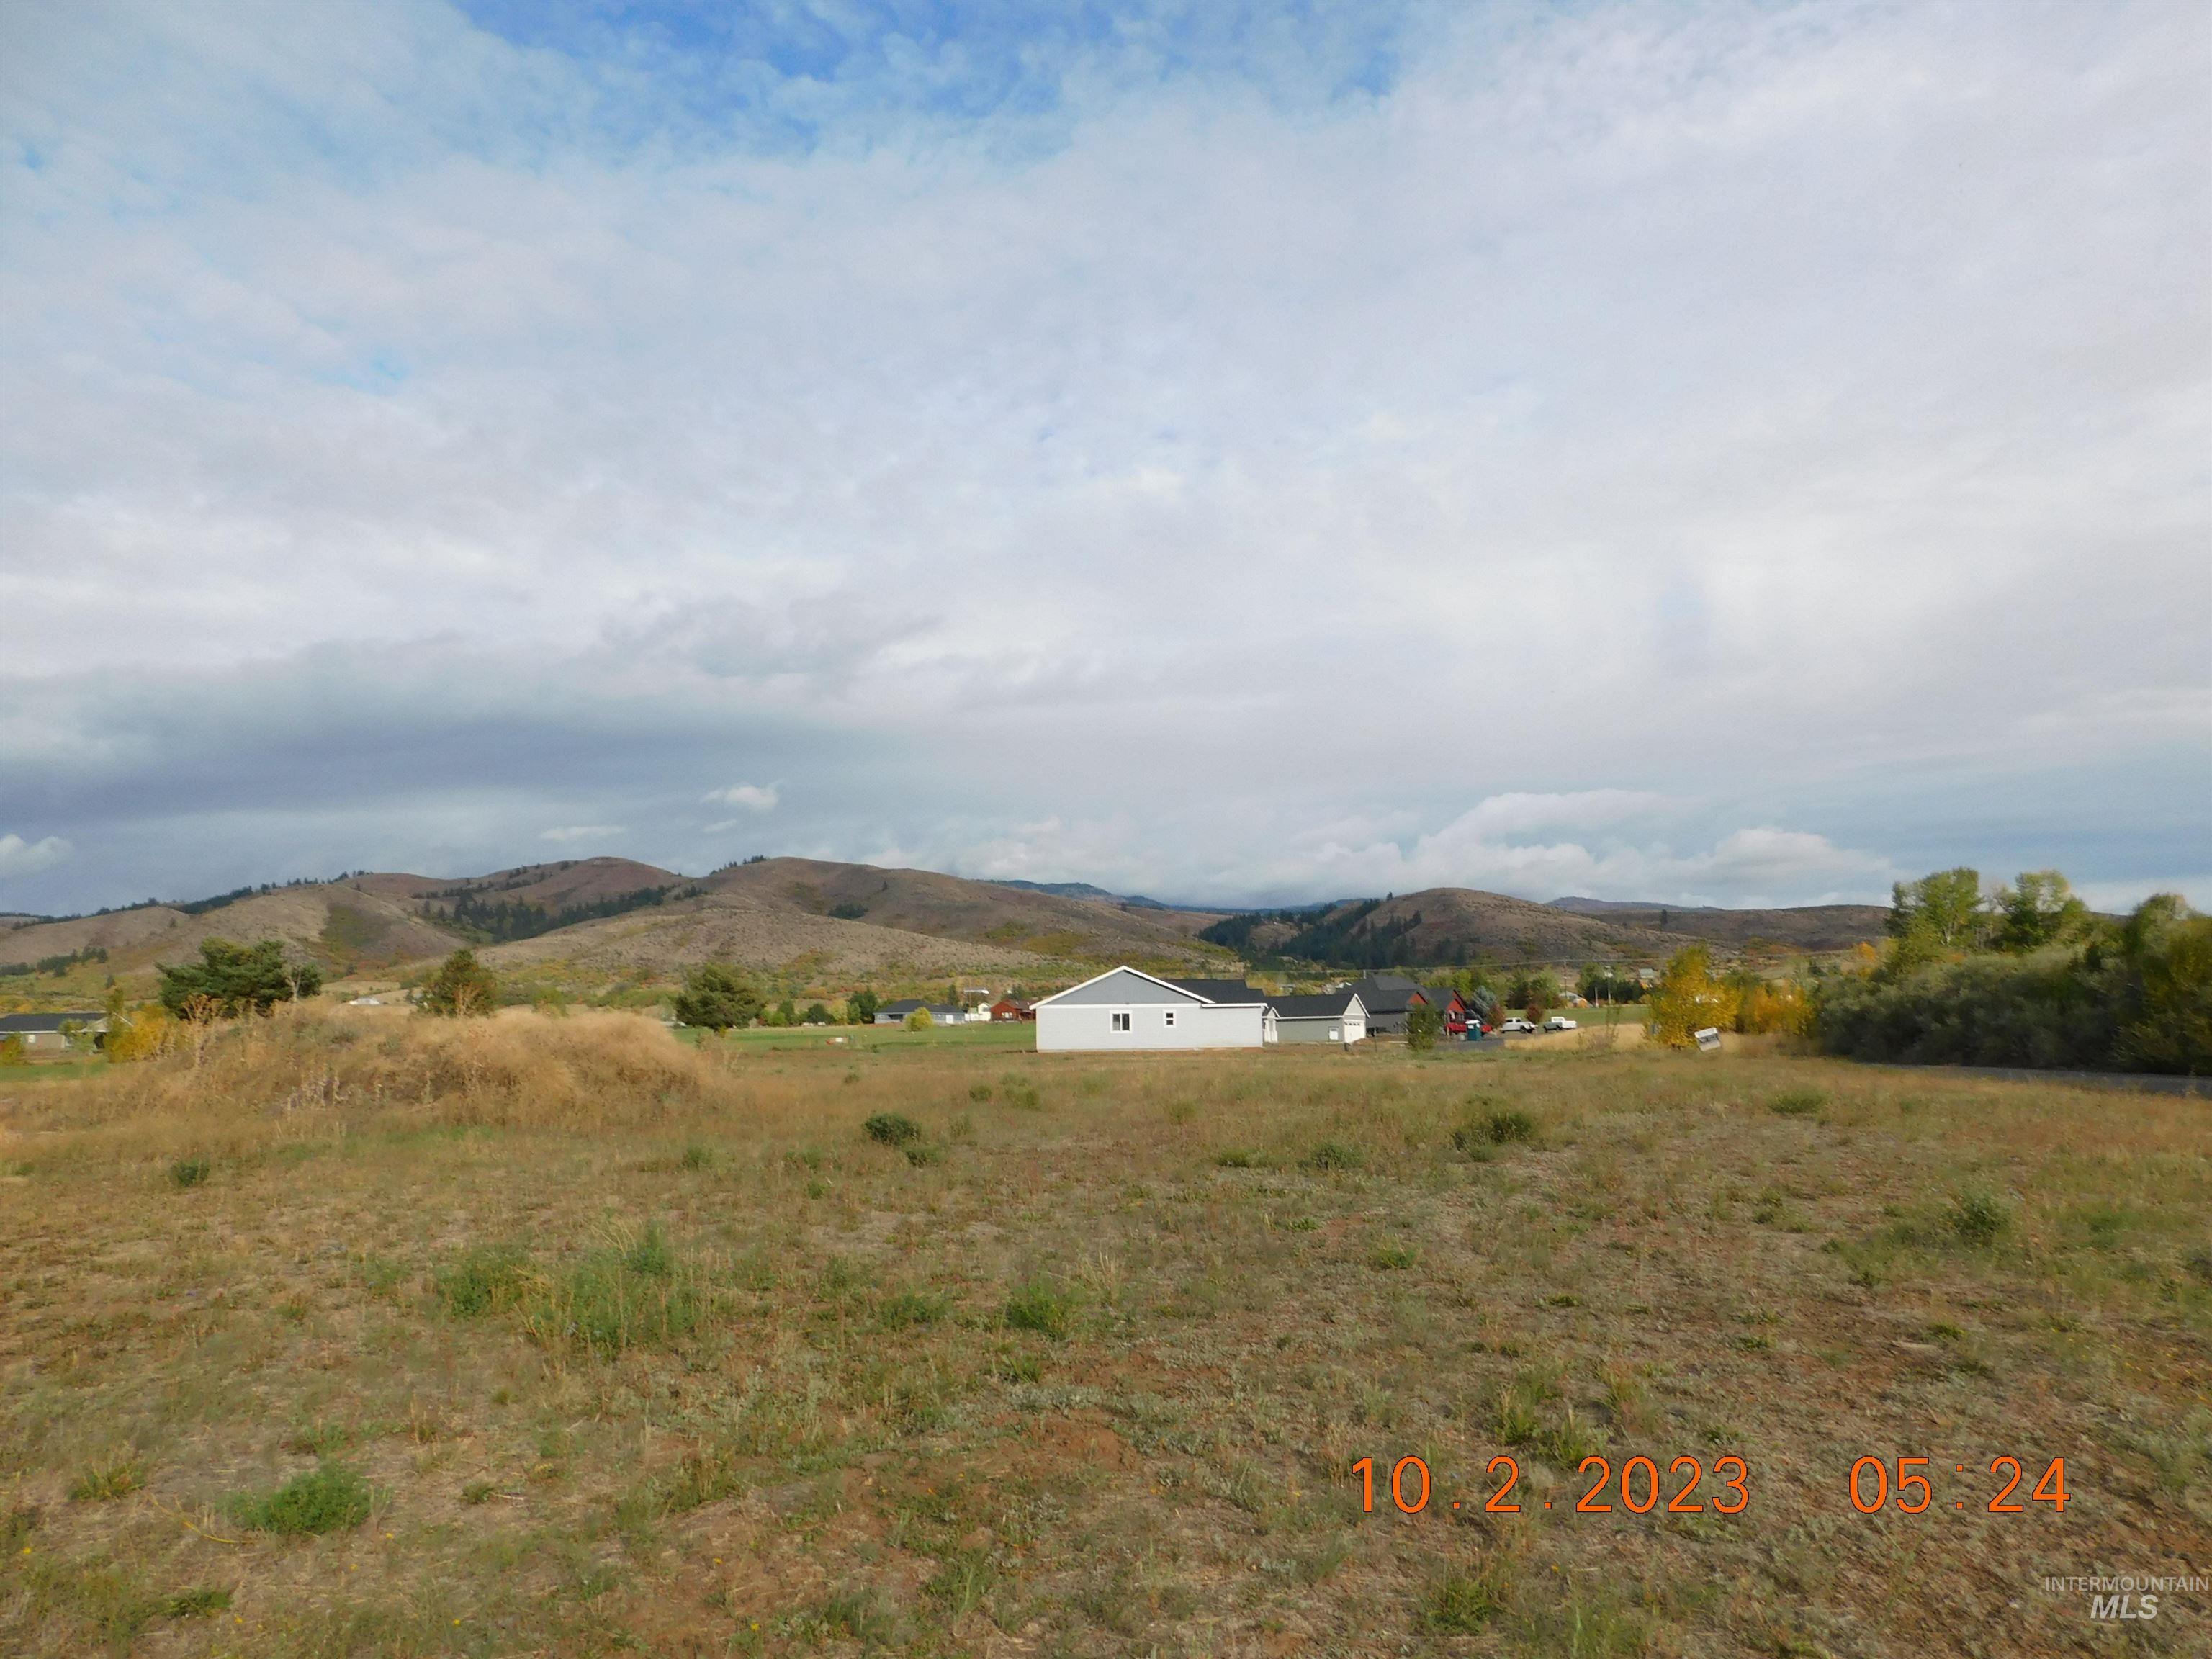 09 Fairway, Council, Idaho 83612, Land For Sale, Price $45,000,MLS 98891304